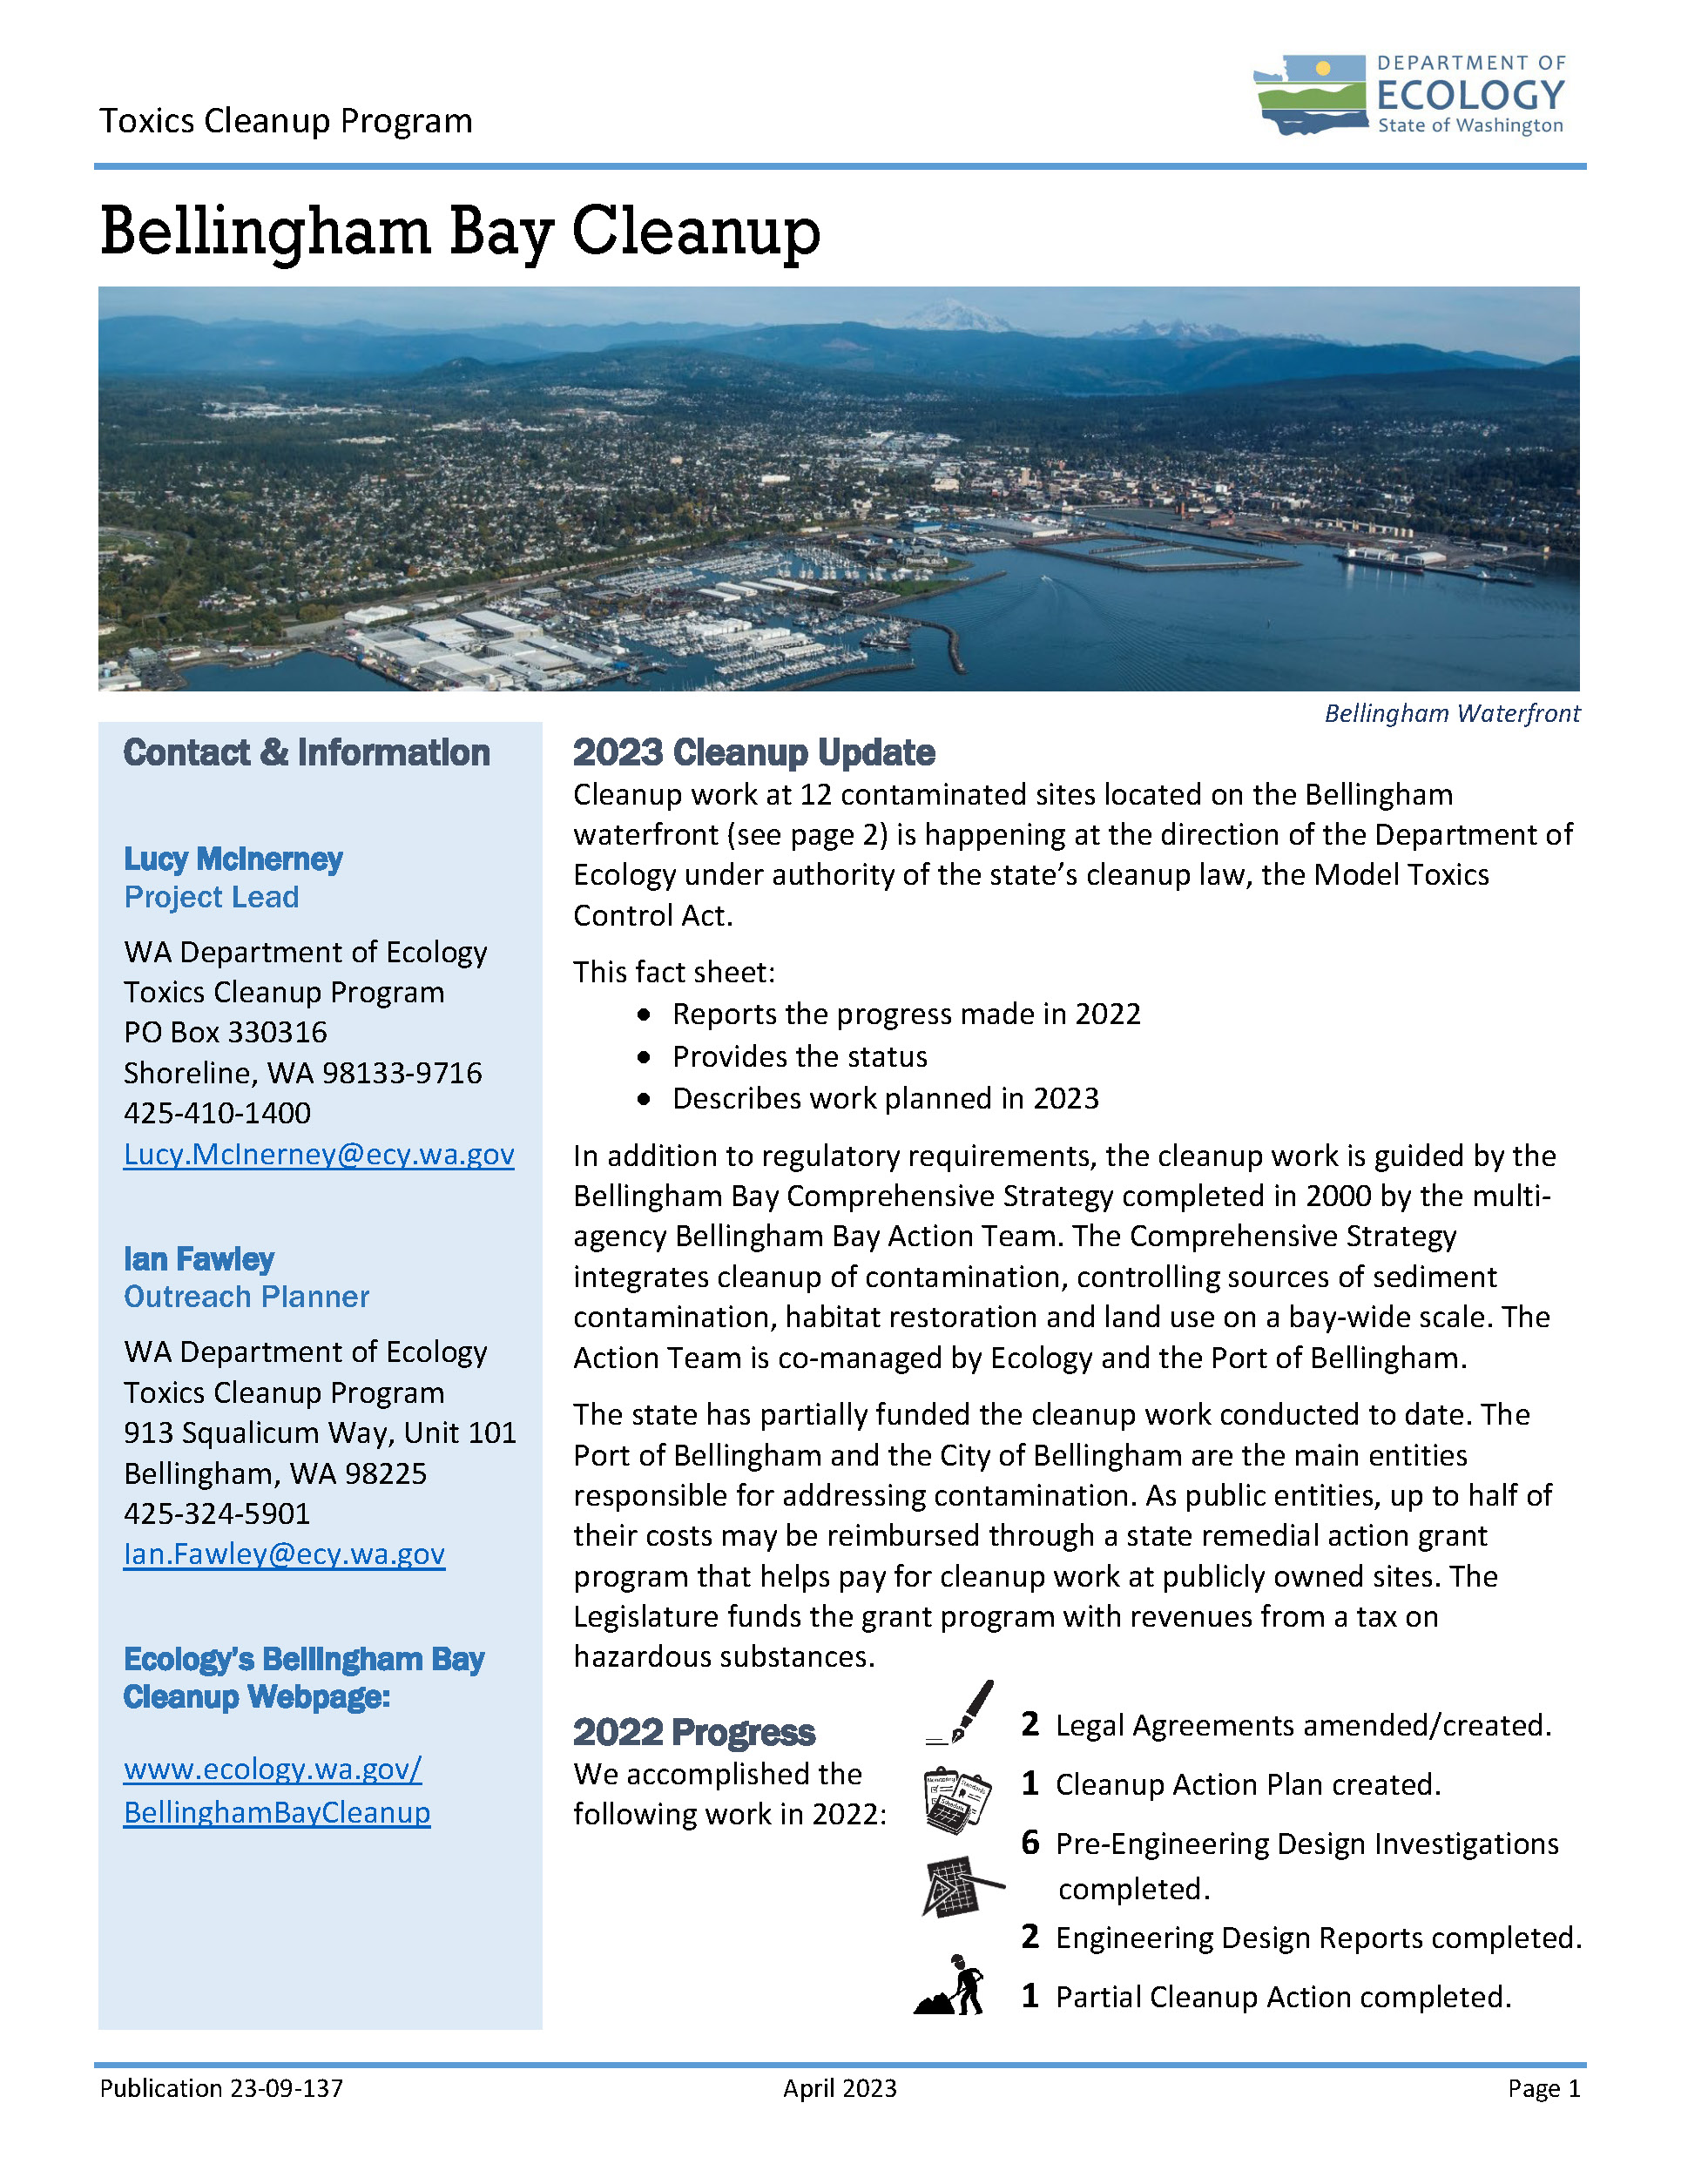 Fact sheet cover page shows aerial view of bay, 2023 cleanup update, 2022 progress